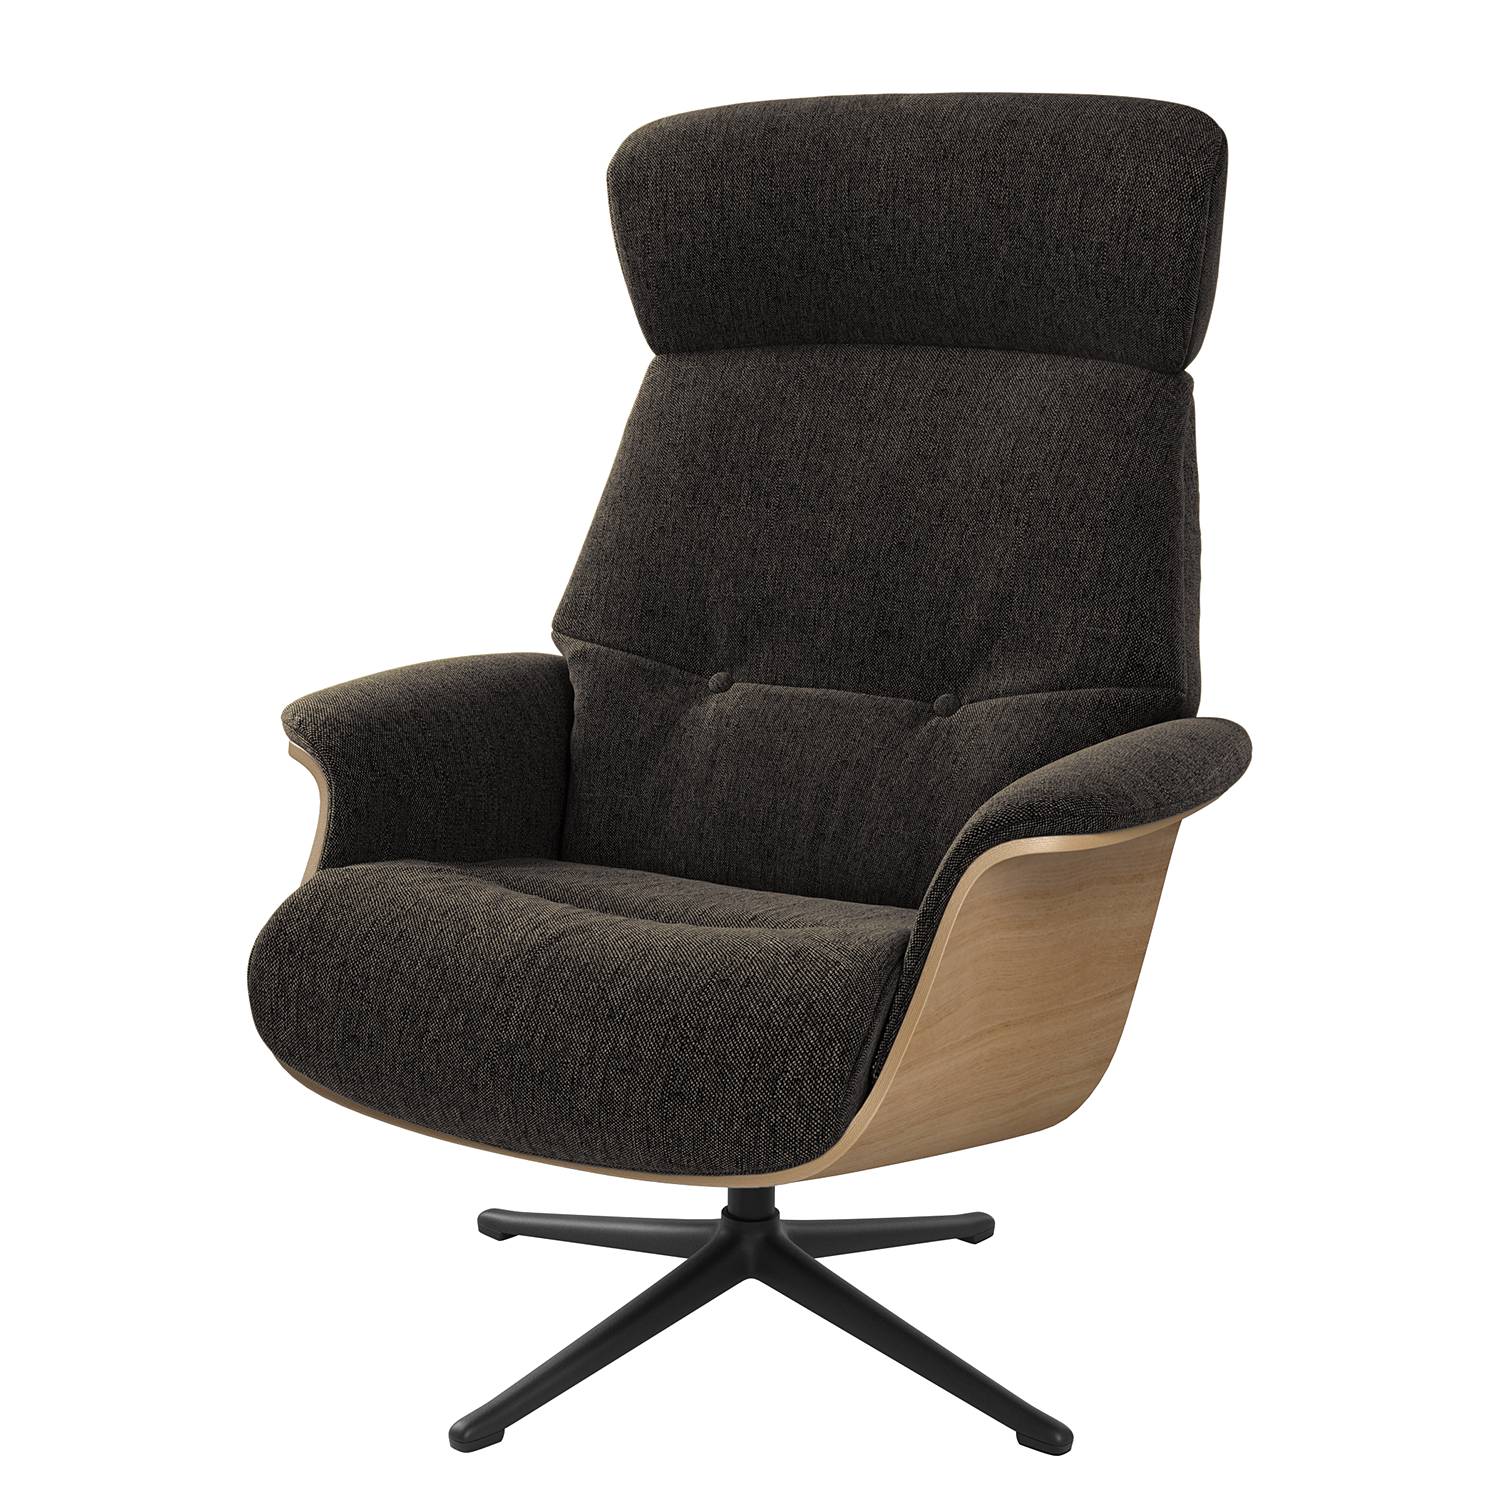 Image of Fauteuil relax Anderson IV 000000001000131277